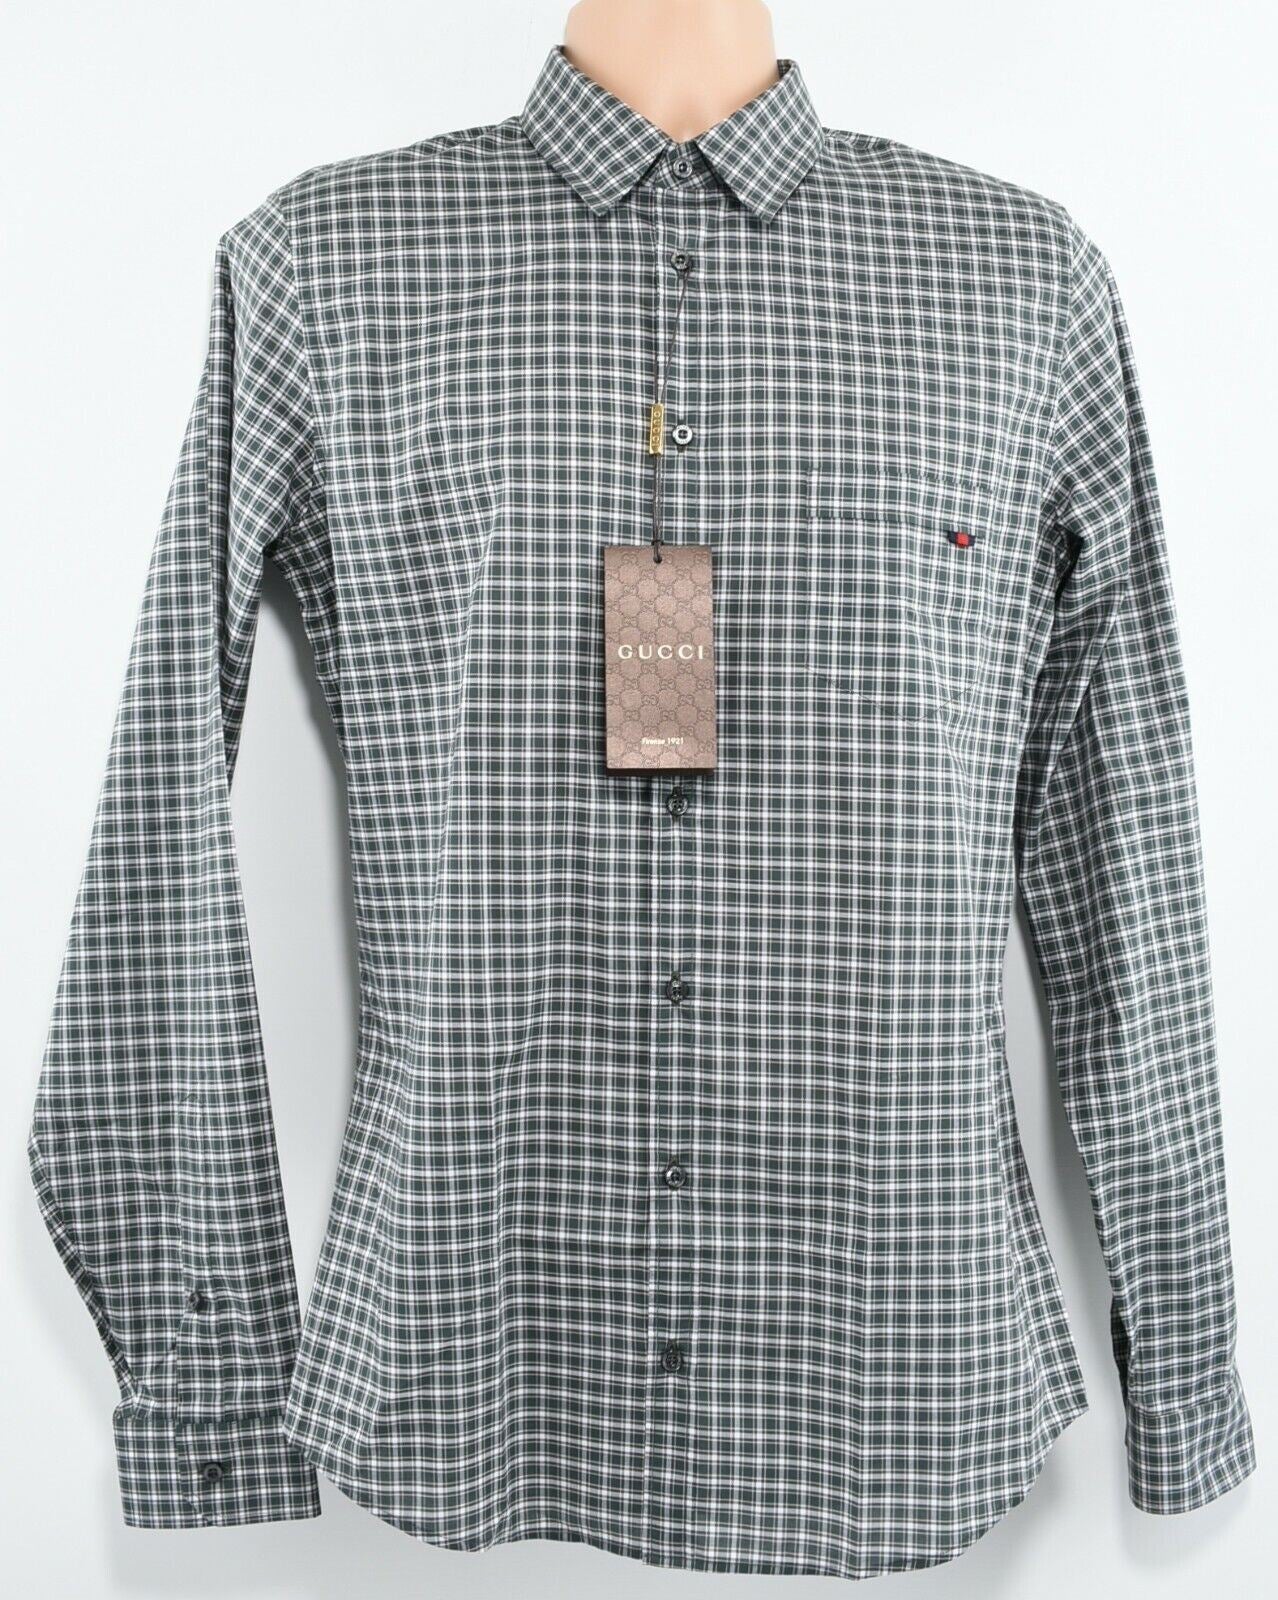 GUCCI Men's Green Checked Long Sleeve Shirt, SKINNY FIT, collar 15.5"